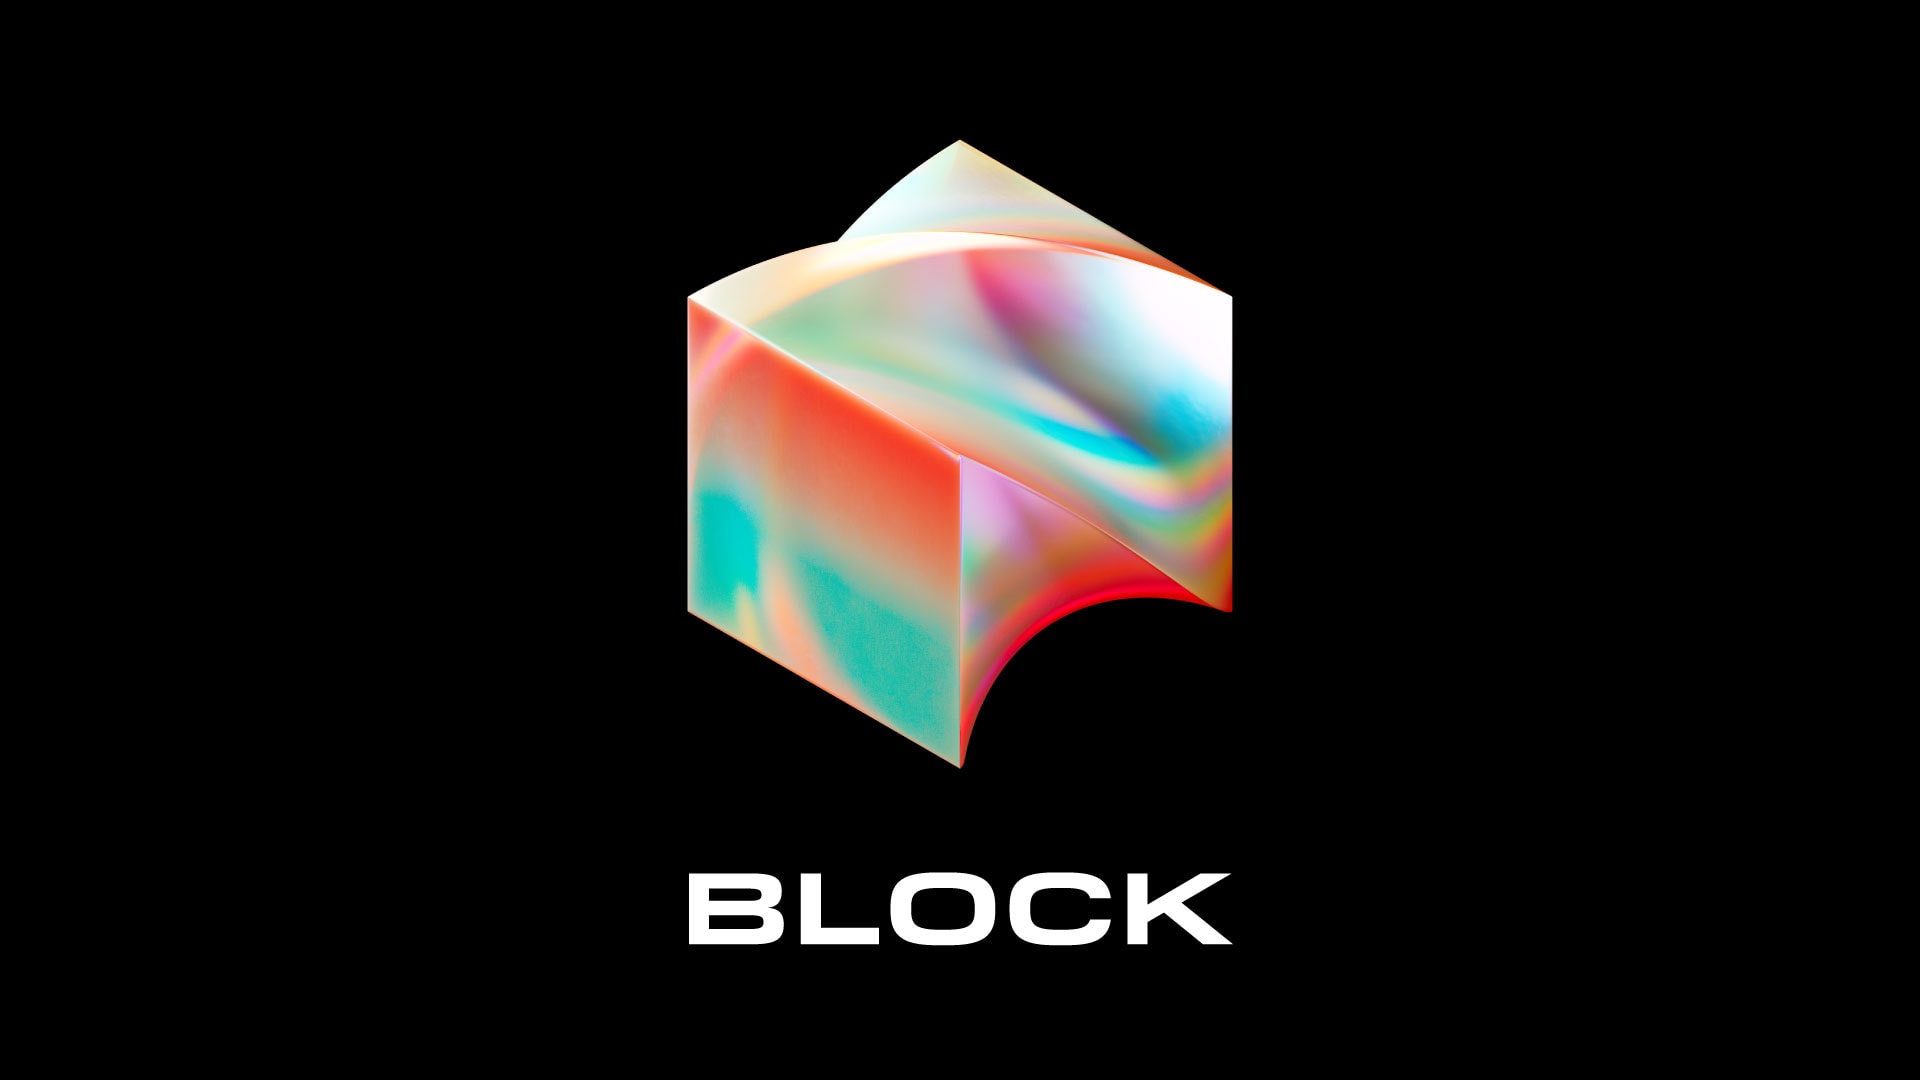 Square changes its name to Block – does that mean more focus on BTC?